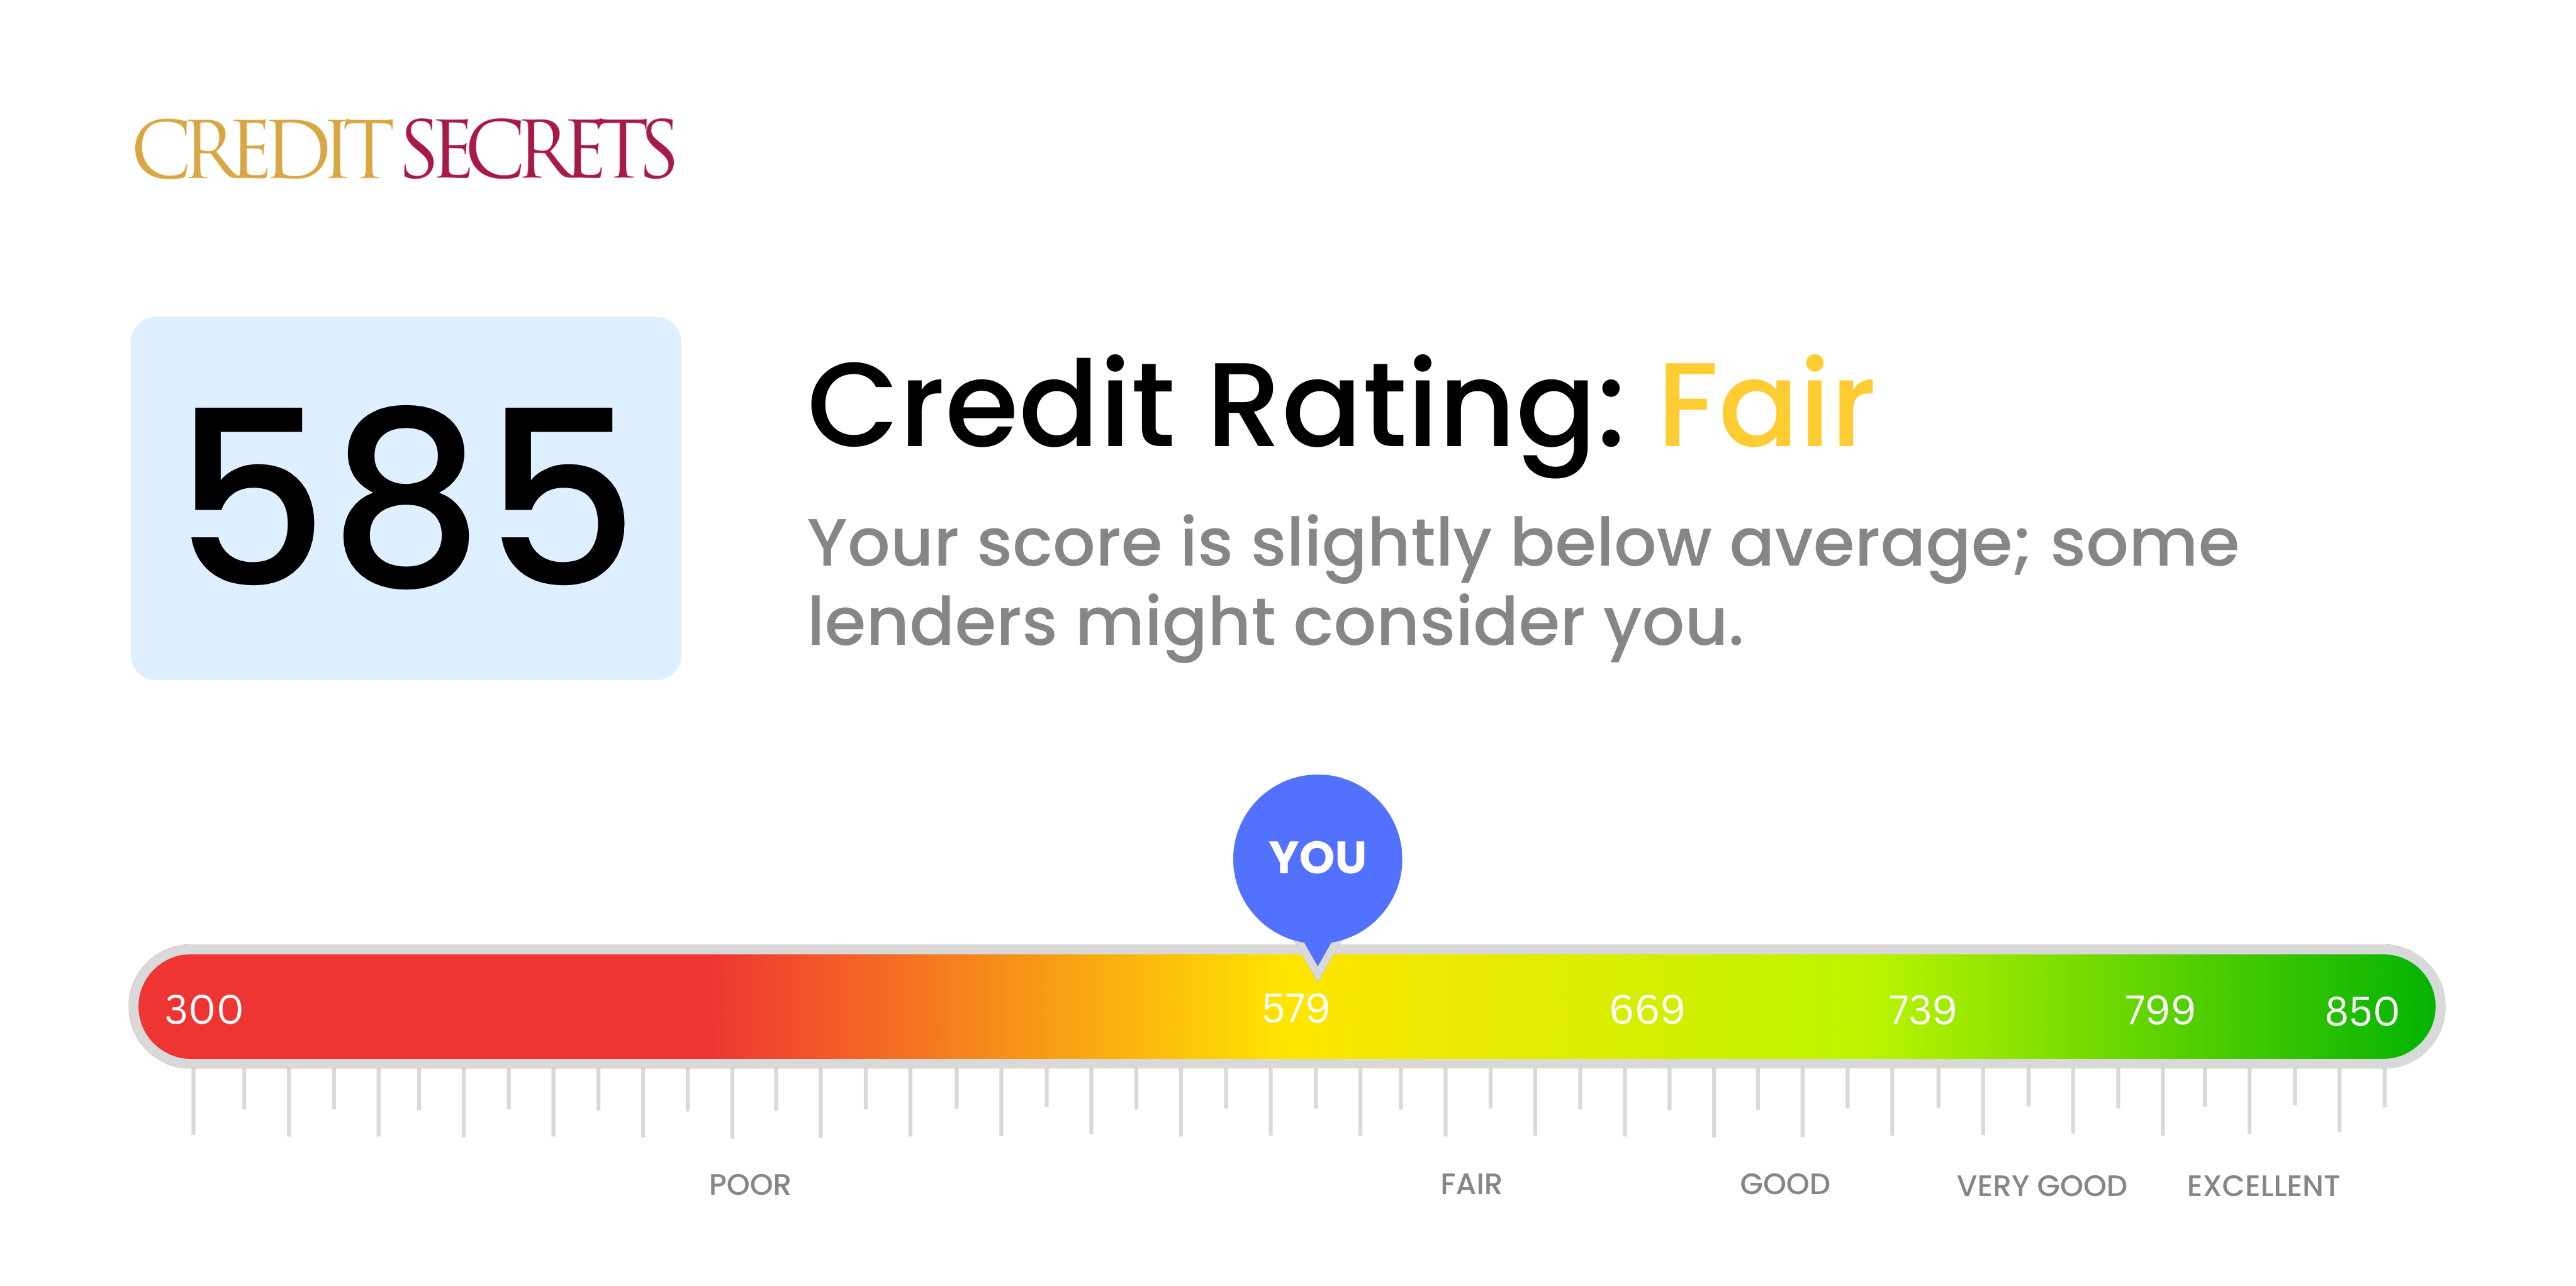 Is 585 a good credit score?